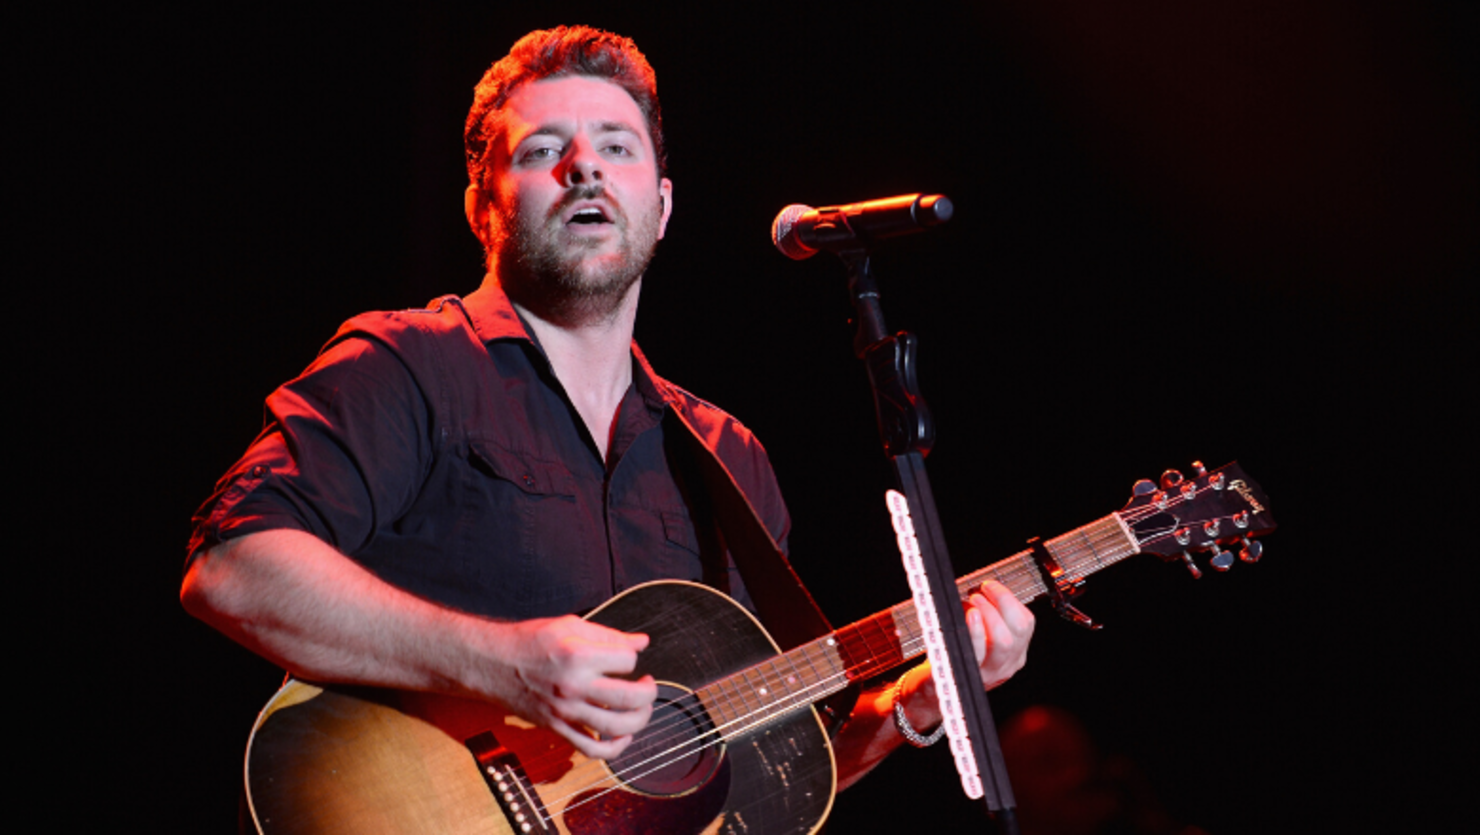 Chris Young Speaks Out On Racism In America: 'I Can't Just Stay Silent'